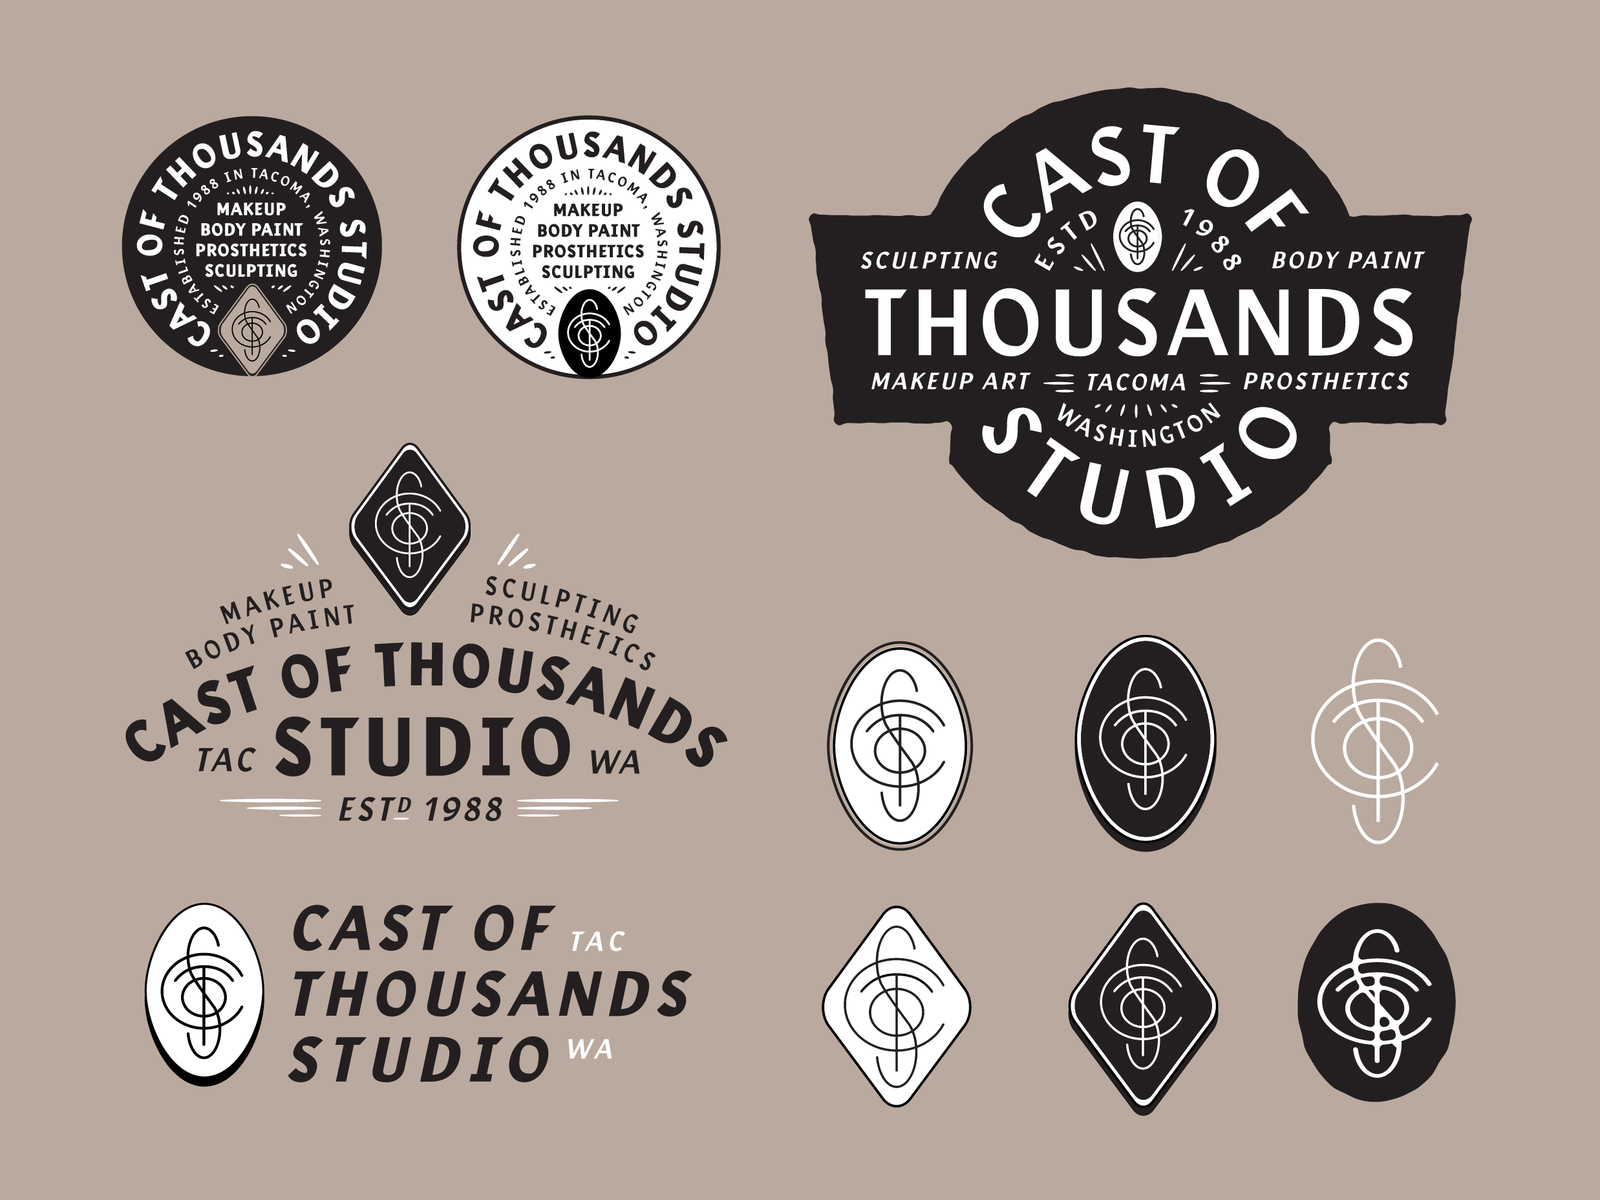 Cast Of Thousands by Joey Bareither on Dribbble